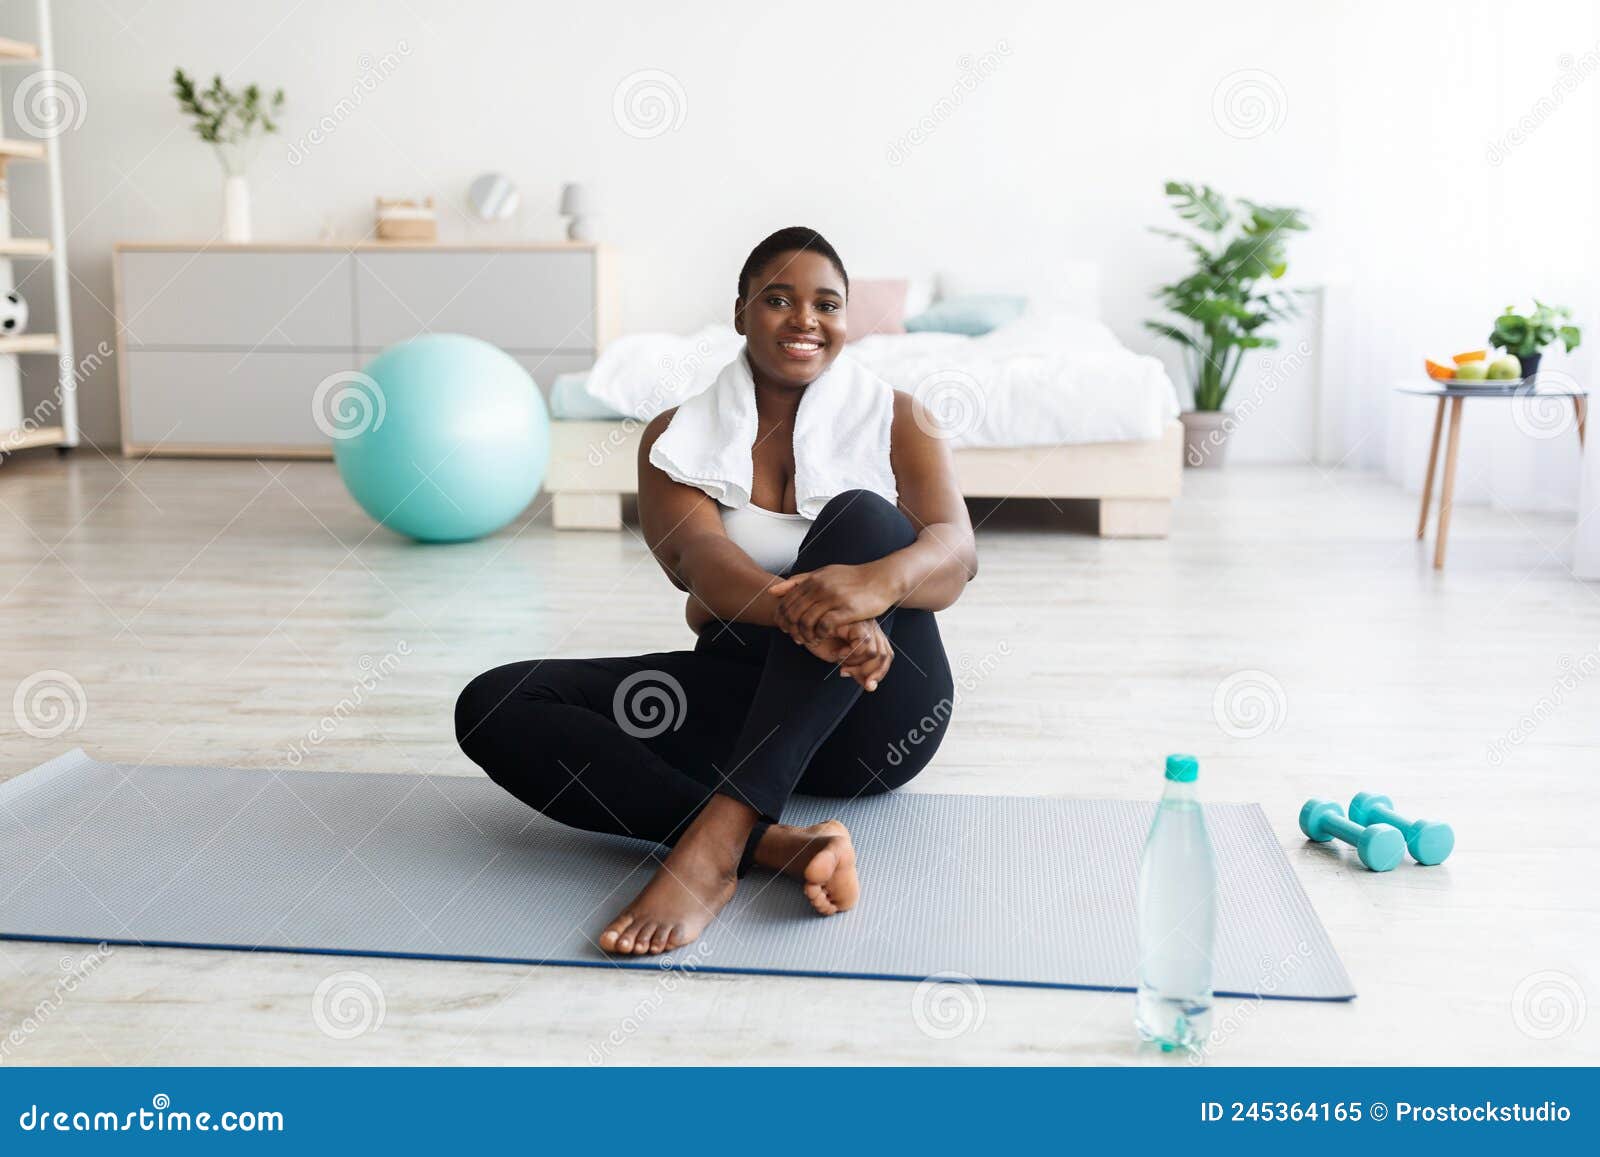 Smiling Overweight Young Black Woman Sitting on Yoga Mat, Resting after  Home Fitness, Copy Space Stock Image - Image of athlete, obesity: 245364165